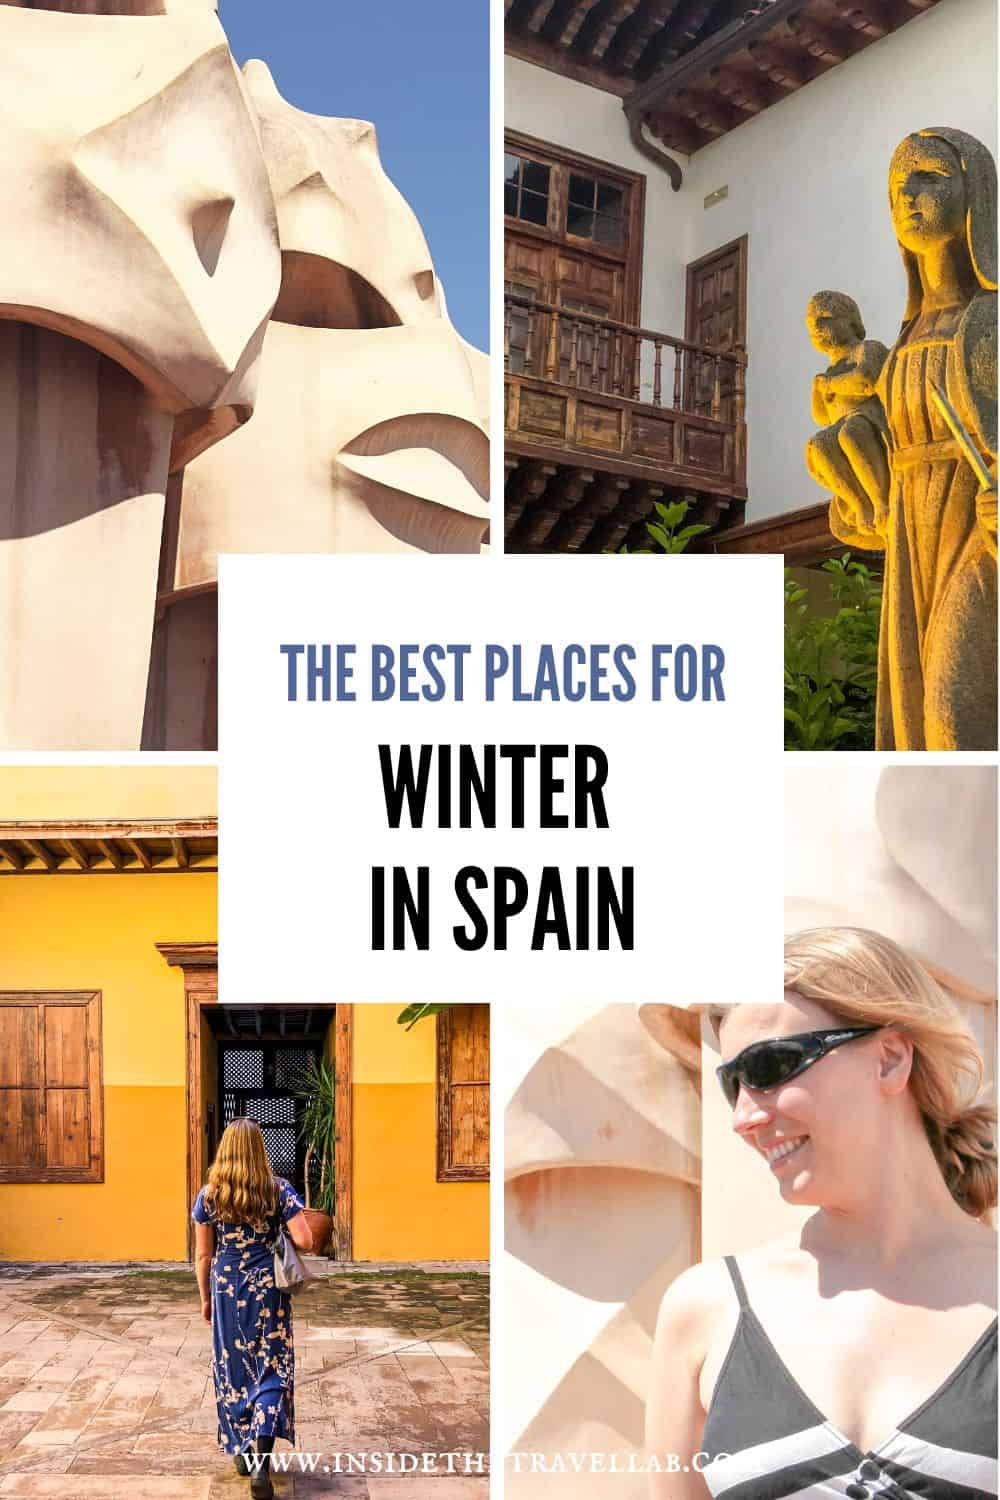 Collage of images from winter in Spain